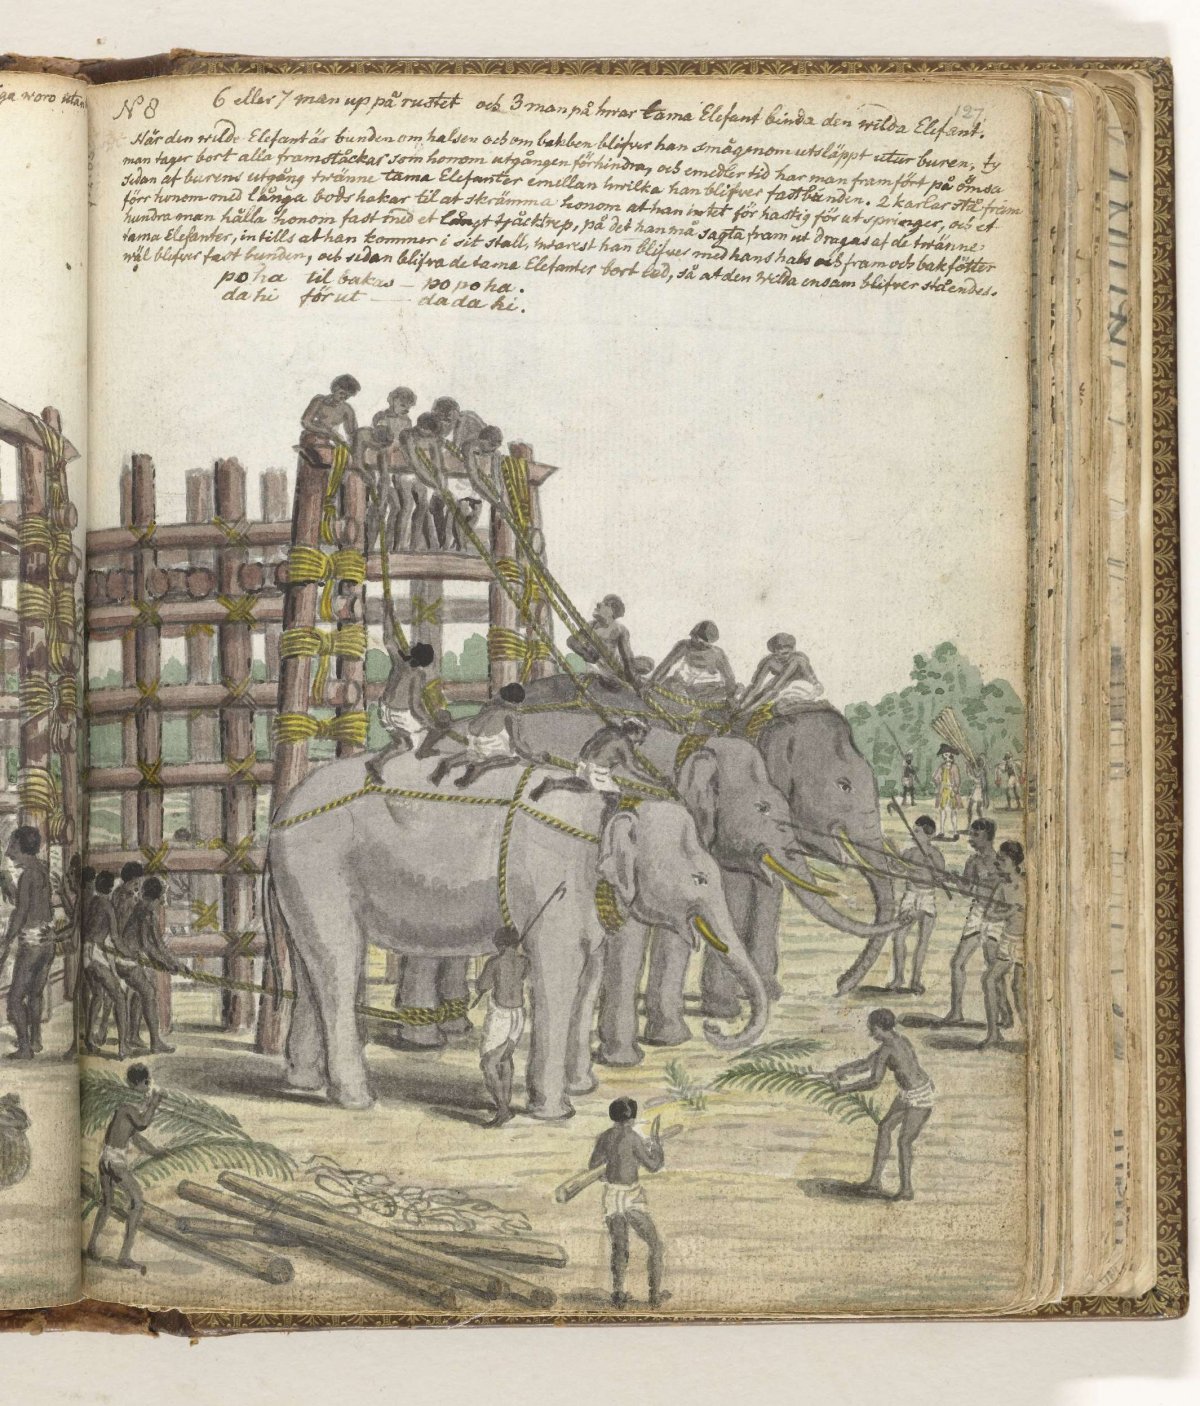 A Bound Elephant being led from the Last Section of the trap, the Prison Corral, Jan Brandes, 1785